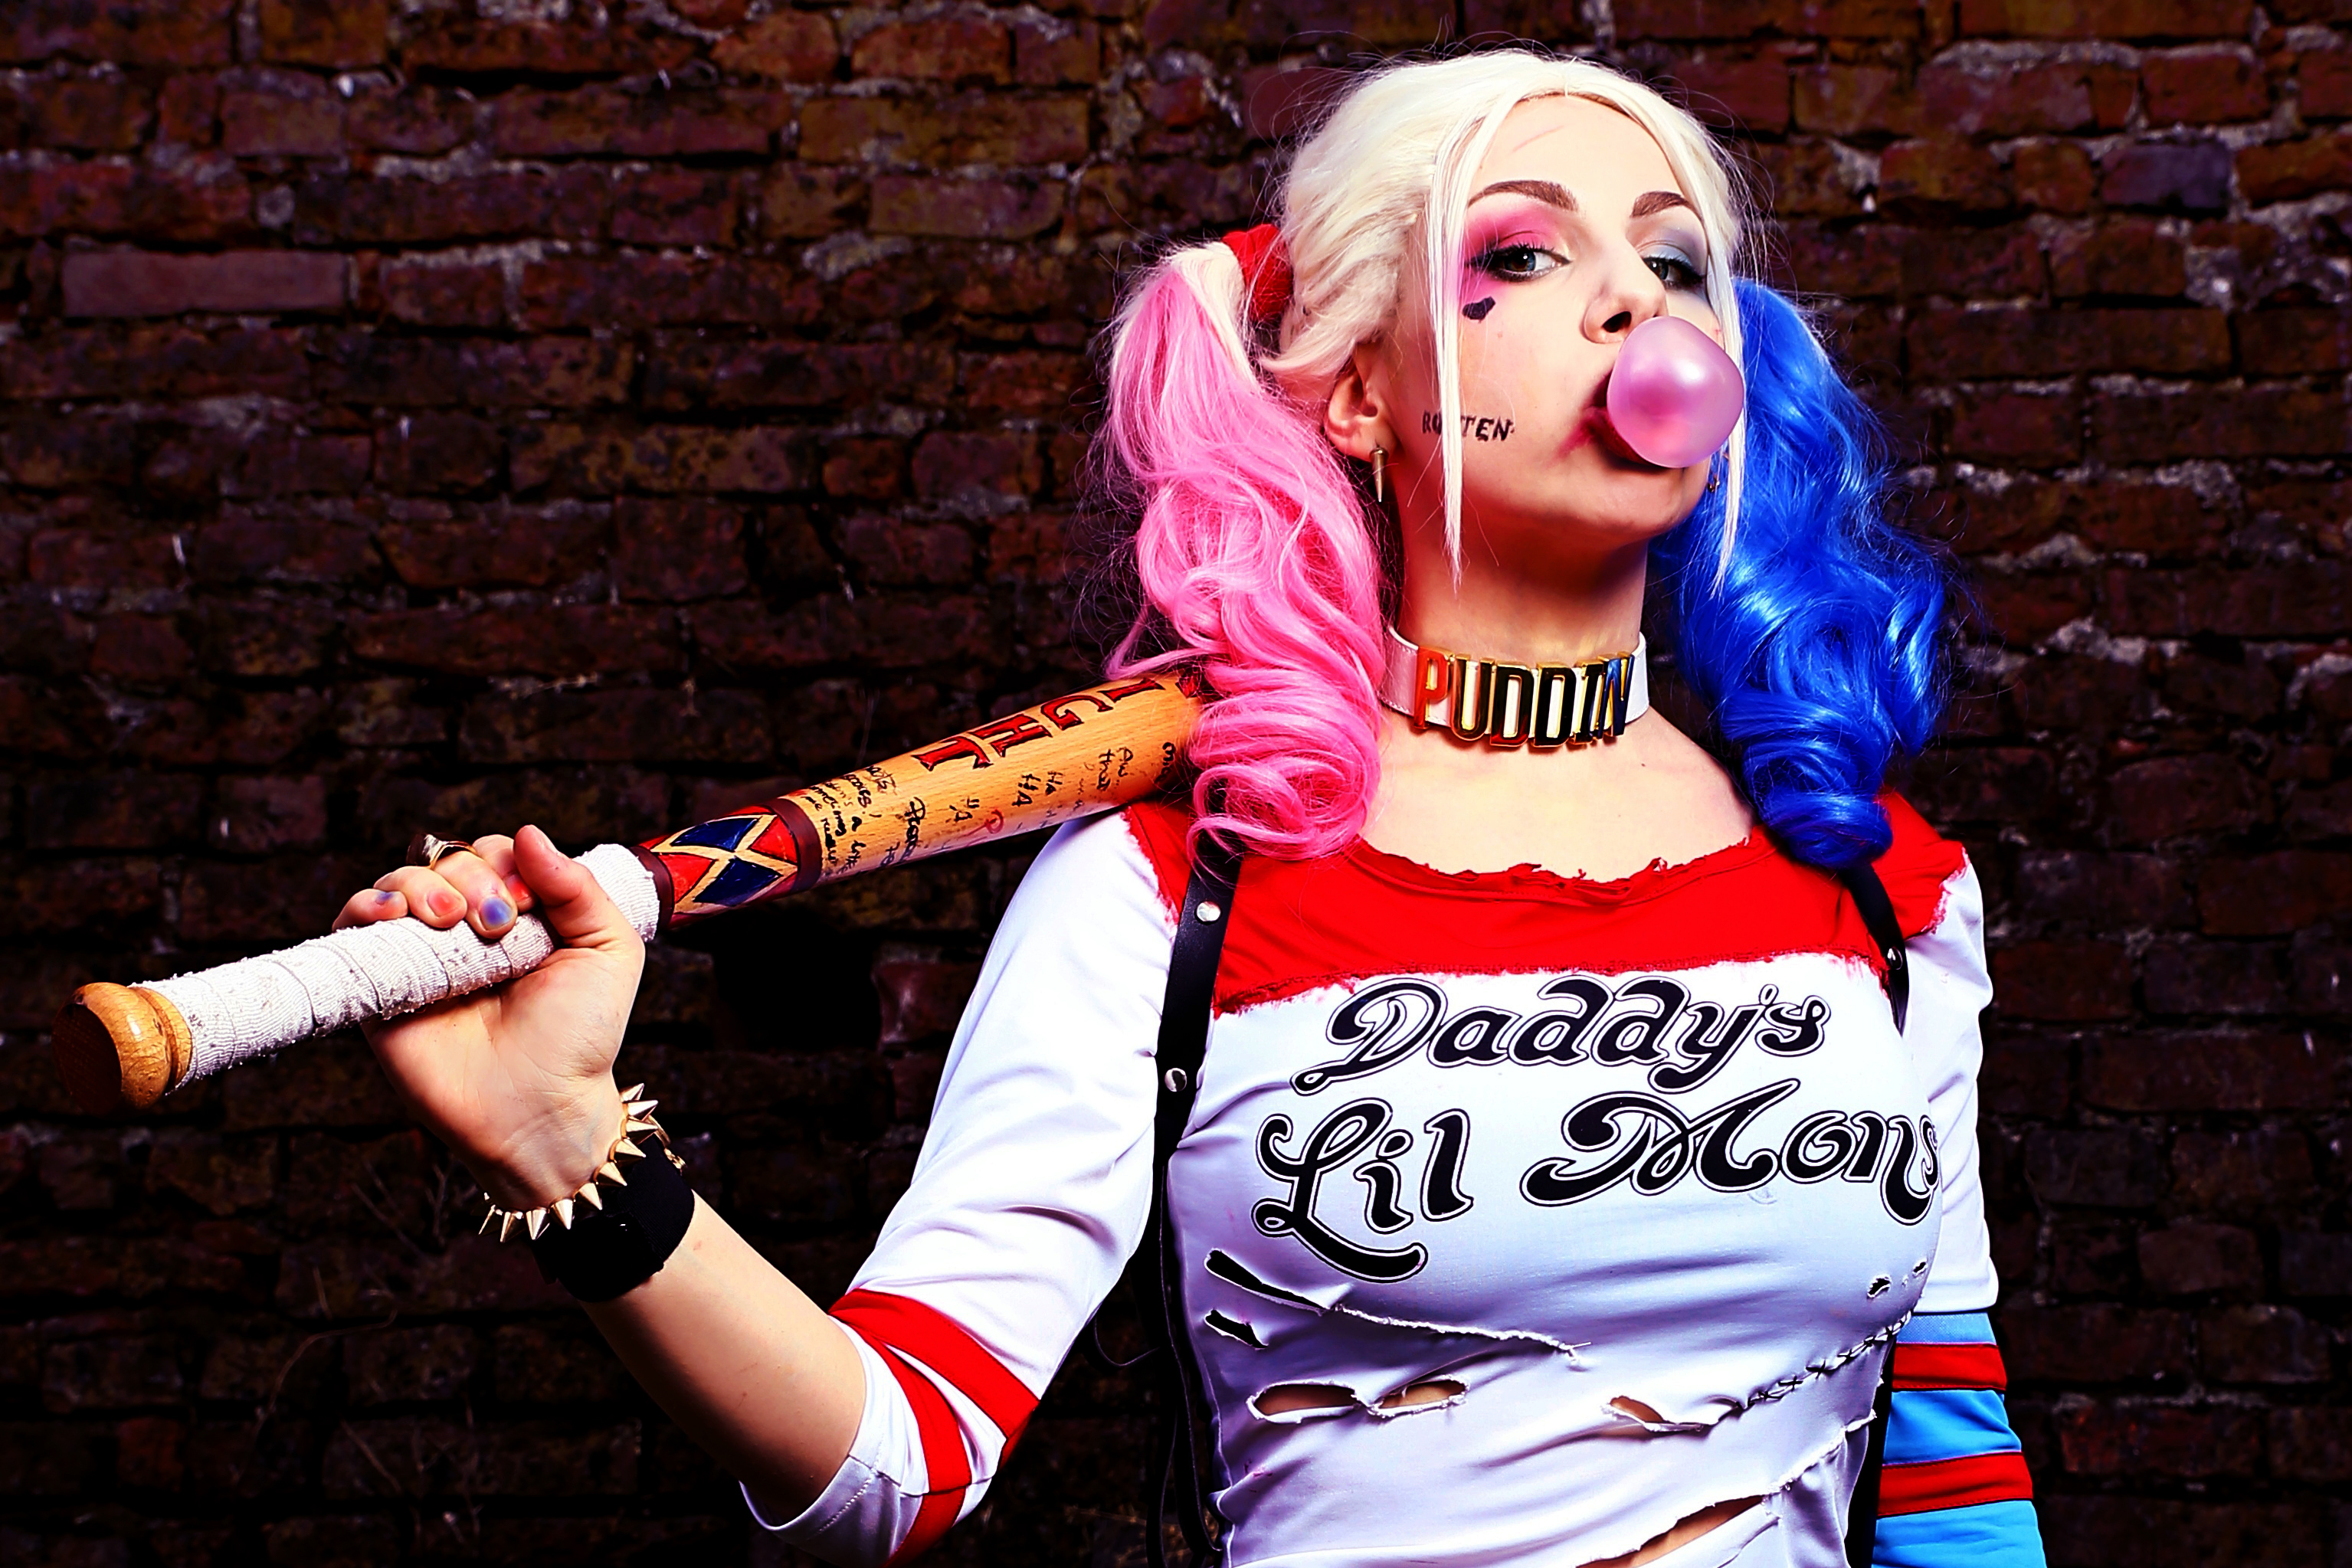 suicide squad, harley quinn, cosplay, women